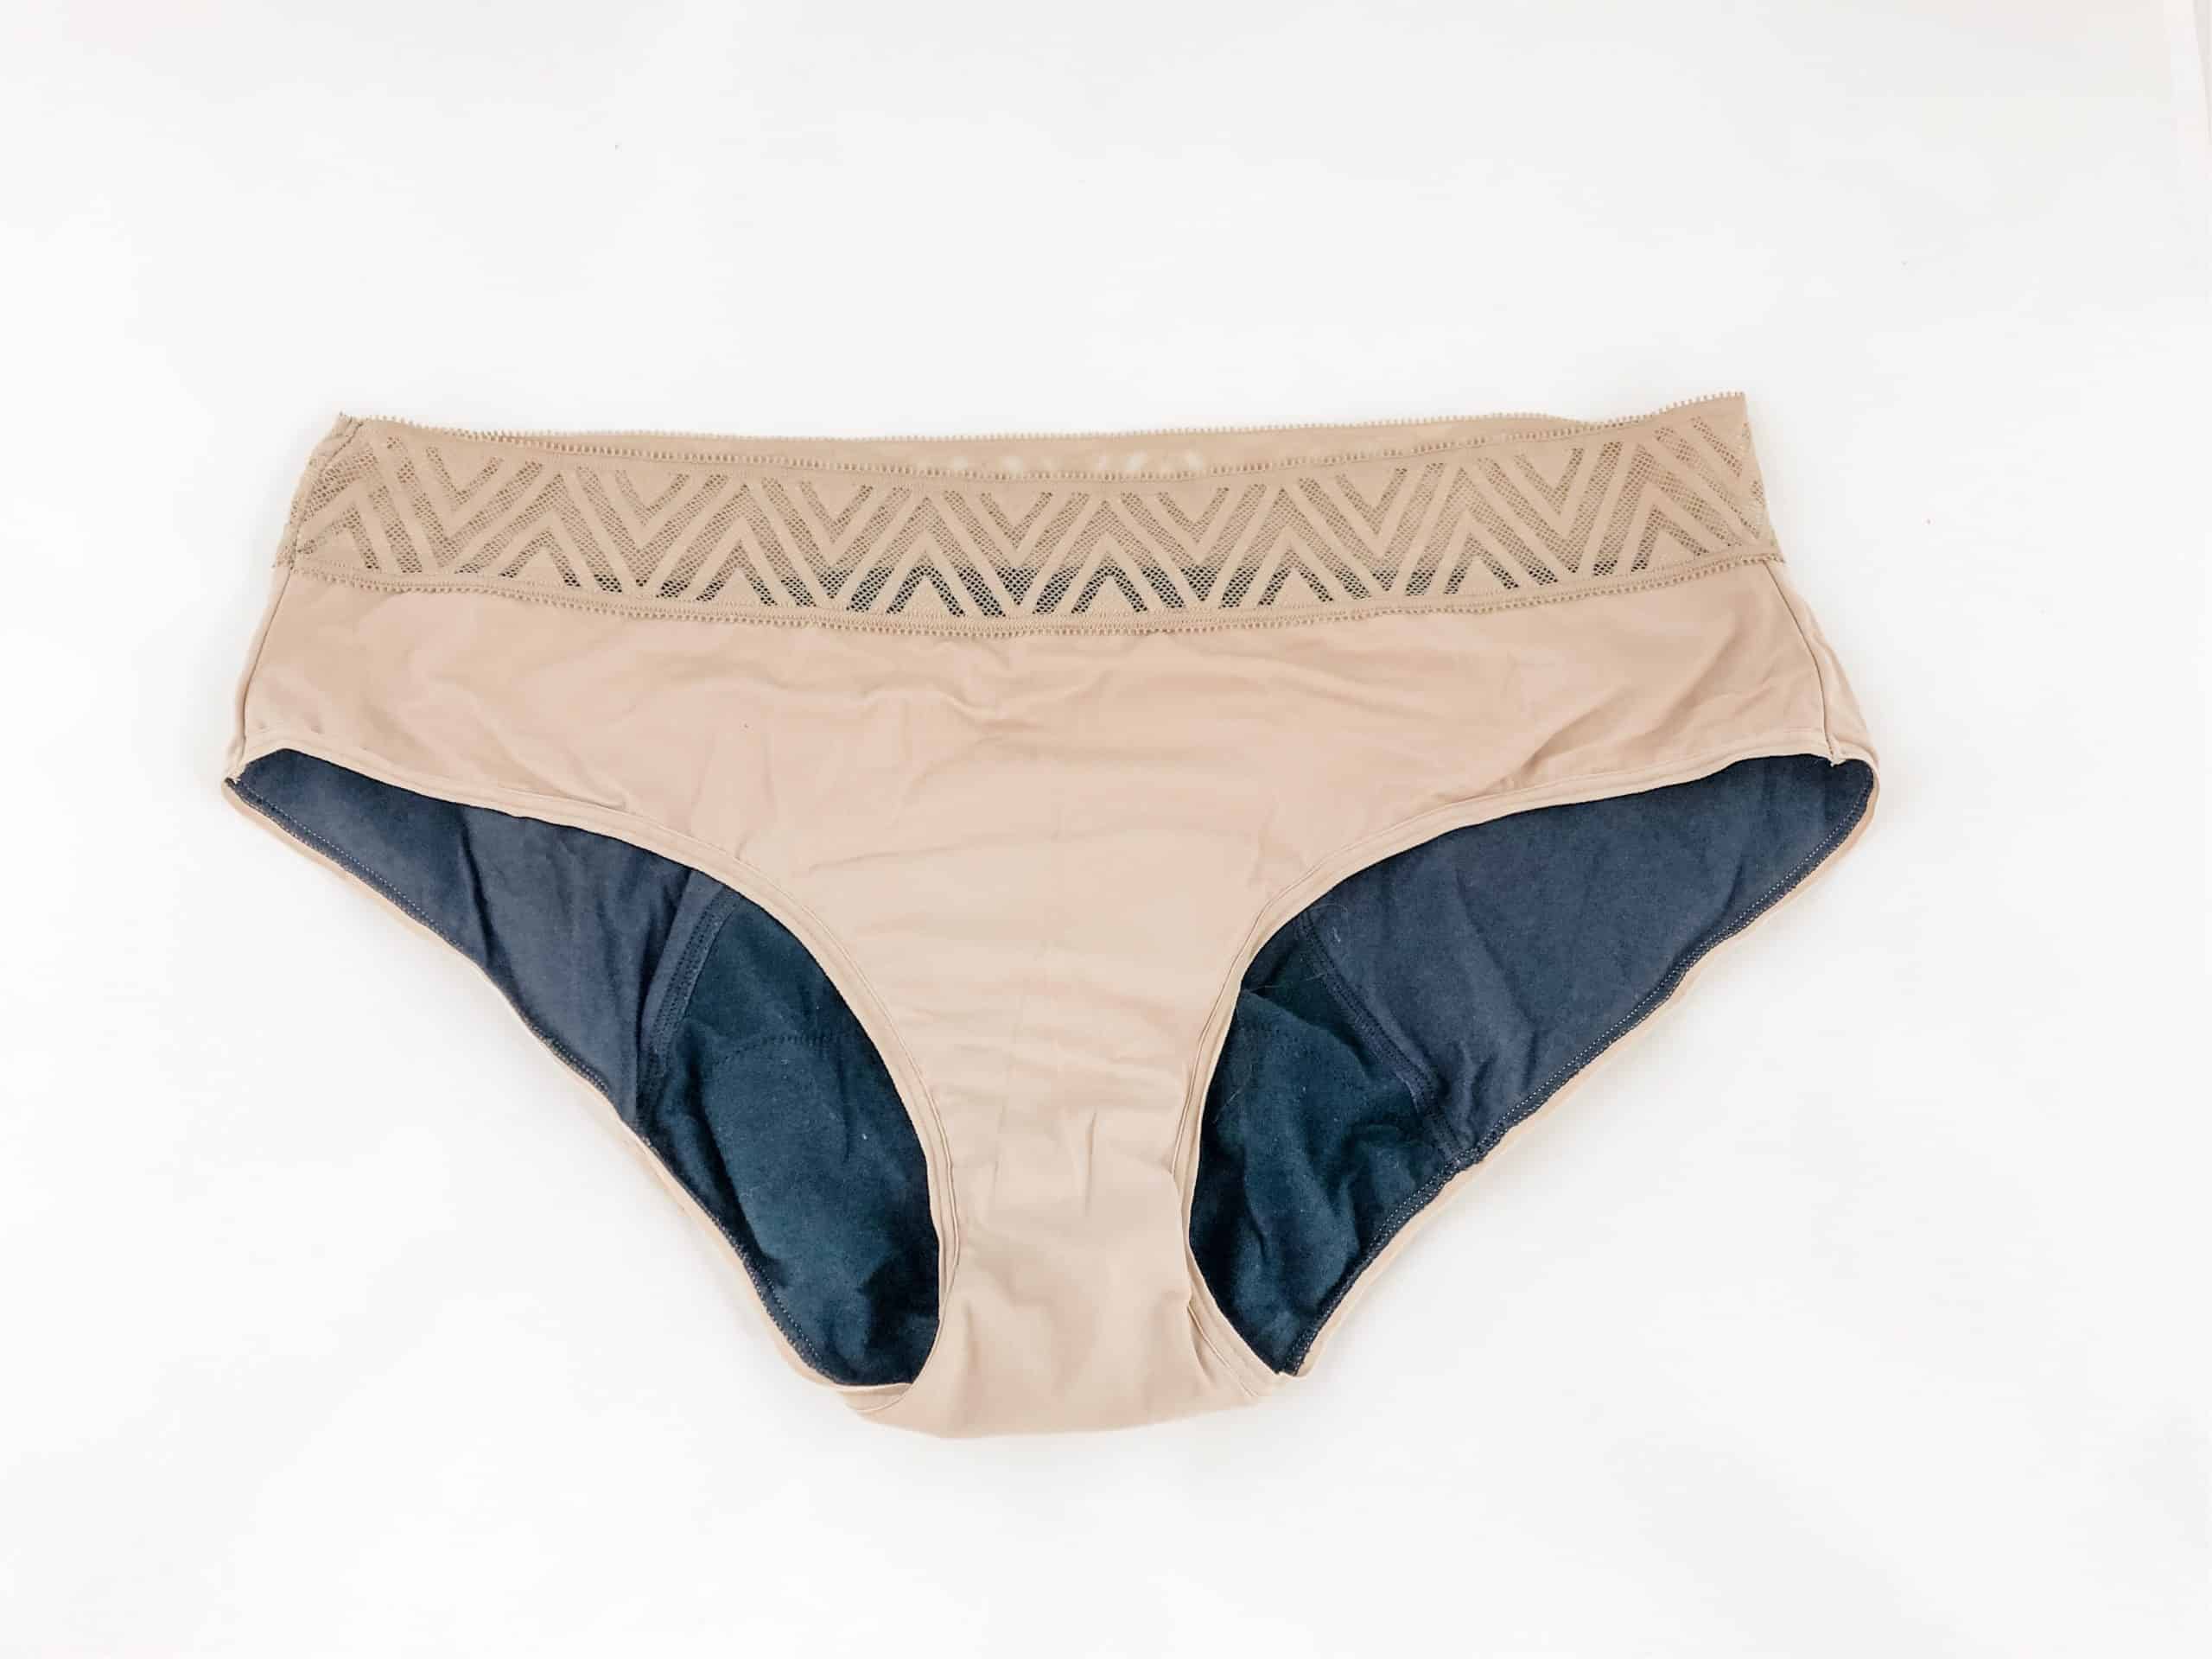 Dreamer period panty Overnight flow, Pantys